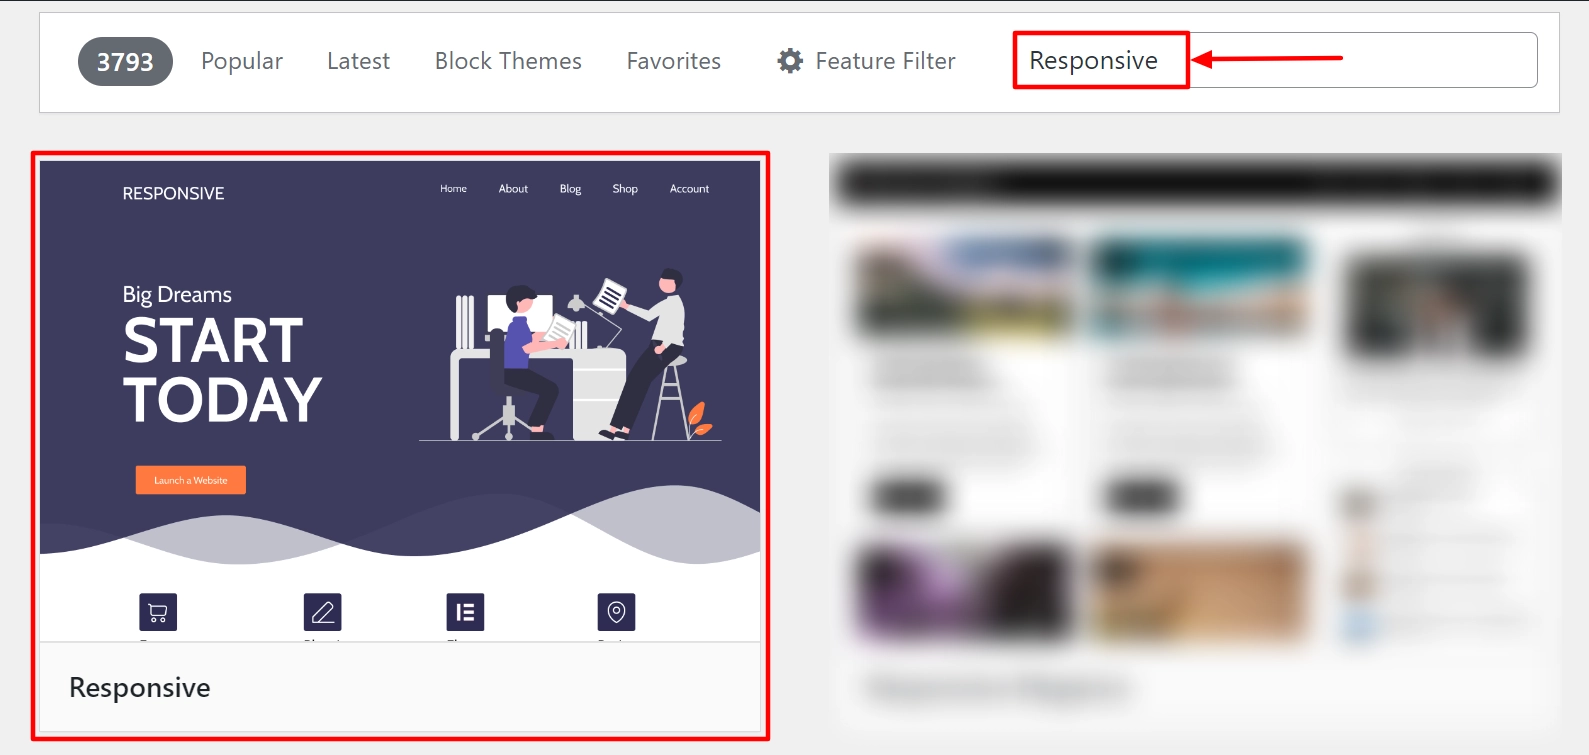 Search for Responsive theme